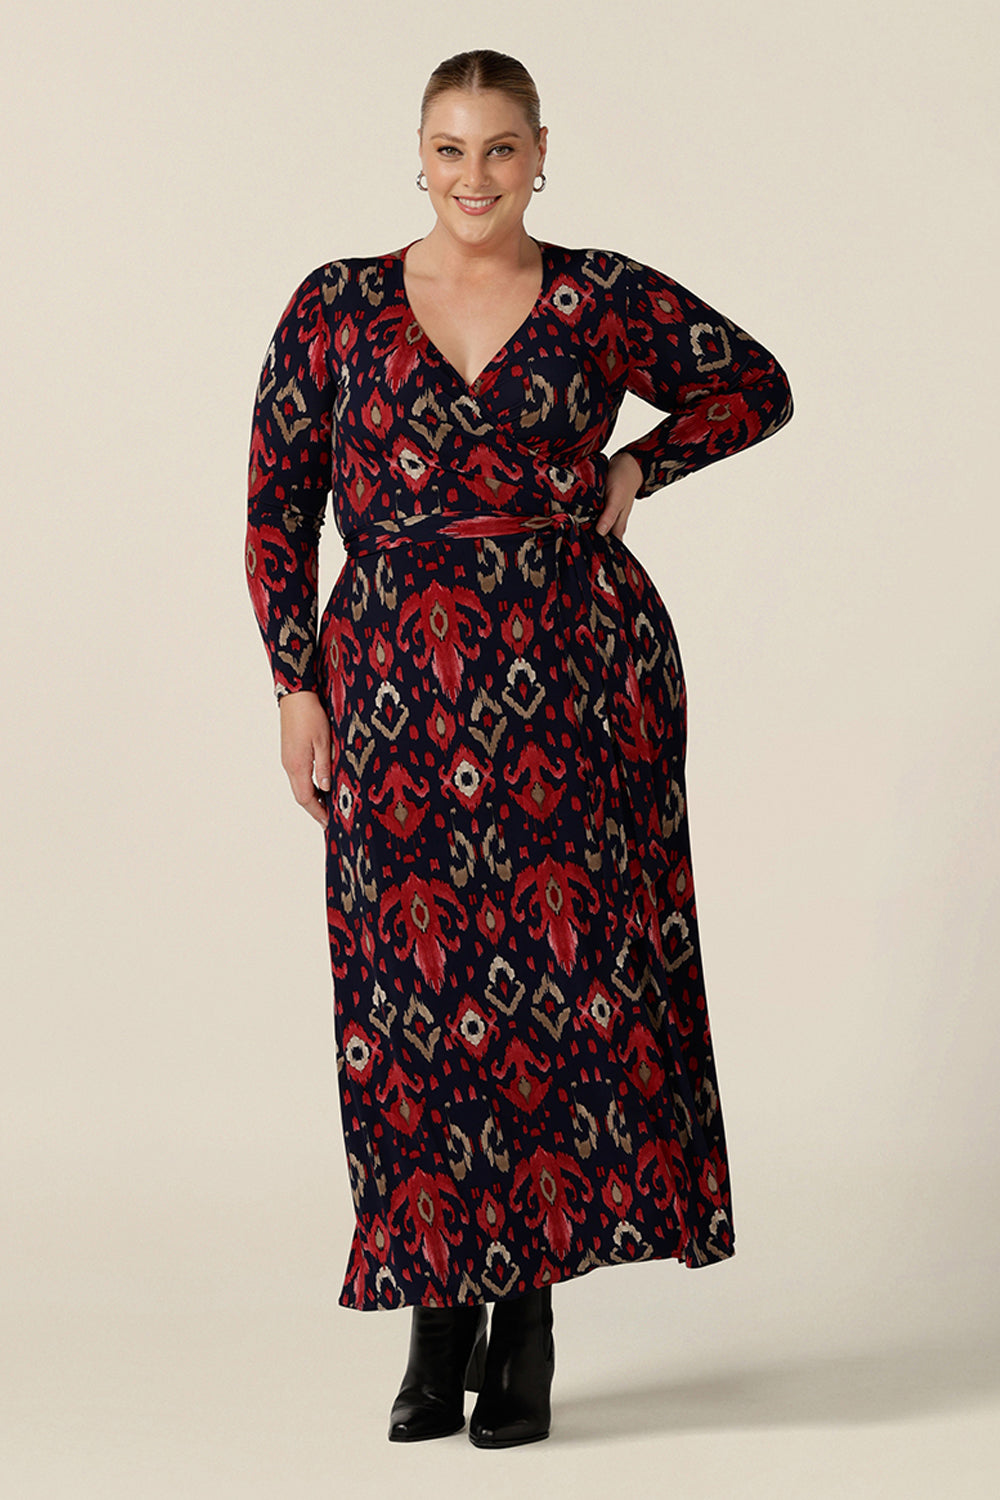 A great maxi dress for plus size women, the Kimberly Maxi Dress in Ikat  is a full length jersey wrap dress with long sleeves. Shown on a size 18 woman, this maxi dress is made in Australia in sizes 8 to 24.